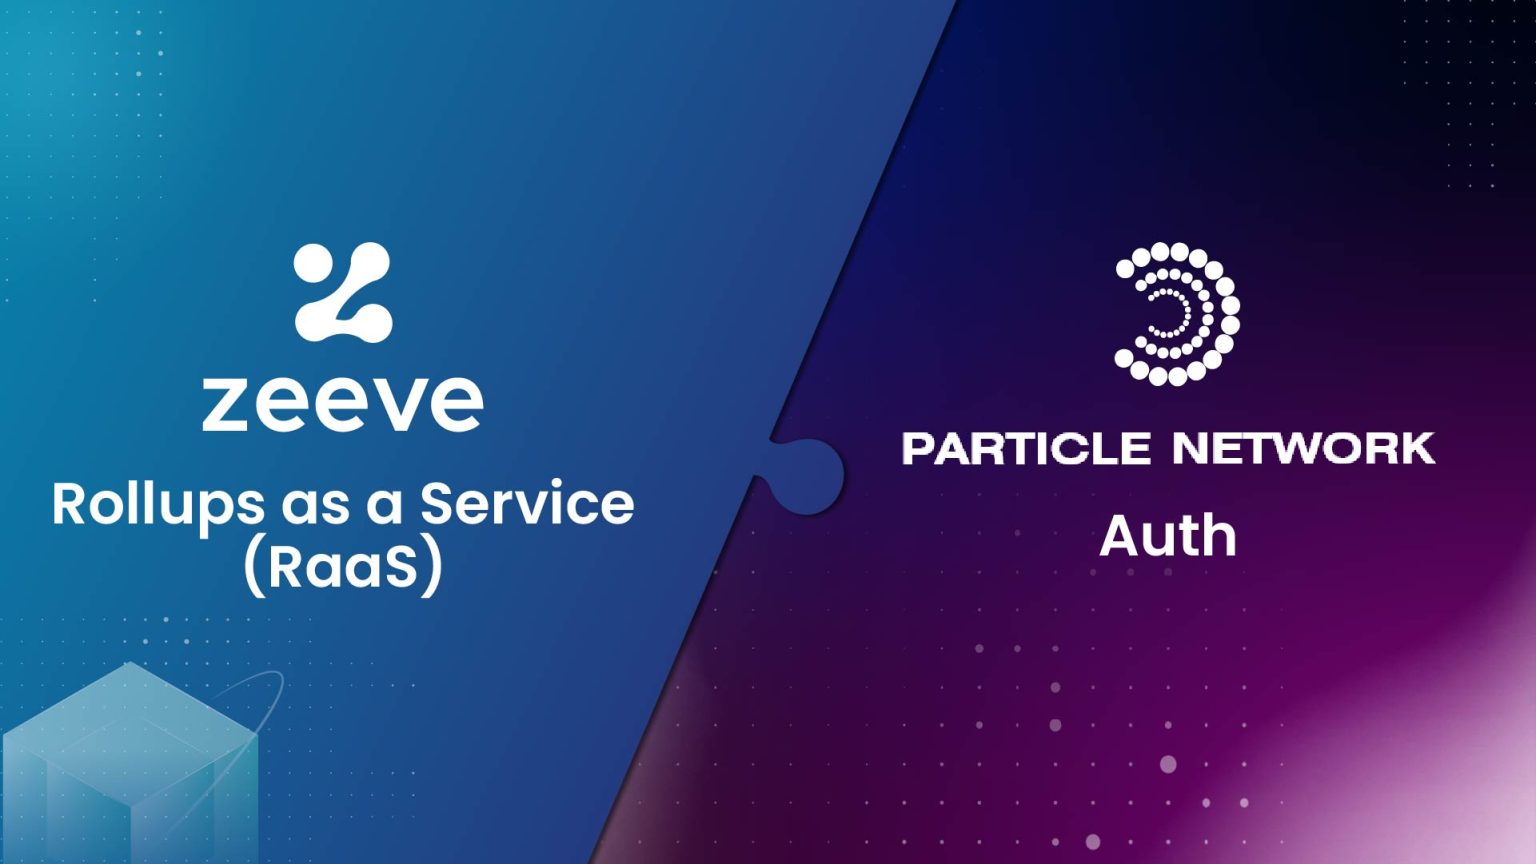 Zeeve and Particle network